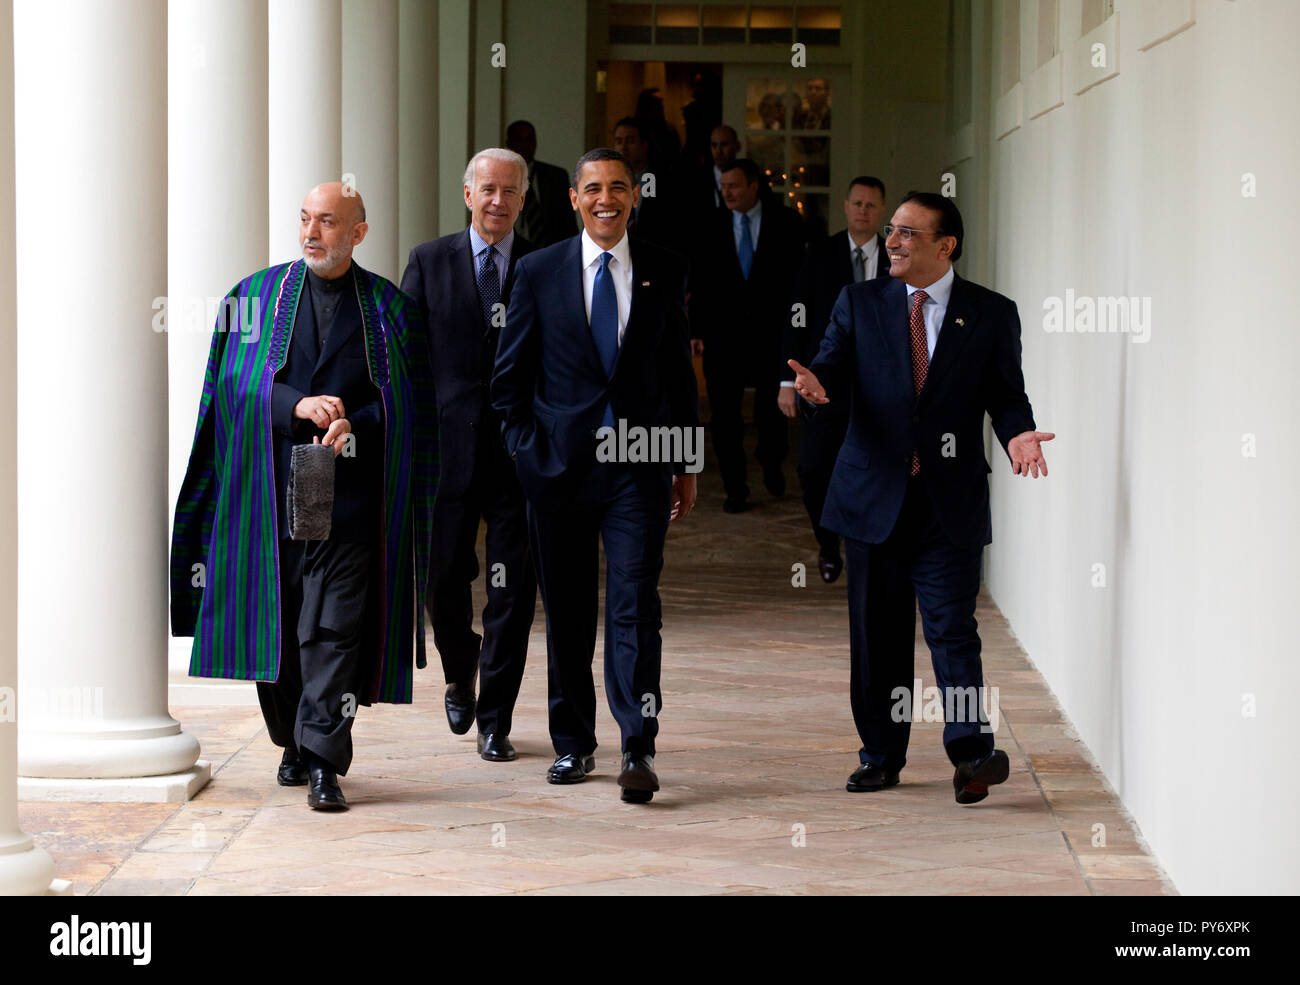 President Barack Obama (center) with Afghan President Karzai and Pakistan President Zardari walk along the Colonnade following a US-Afghan-PakistanTrilateral meeting in Cabinet Room  May 6, 2009. Official White House Photo by Pete Souza Stock Photo